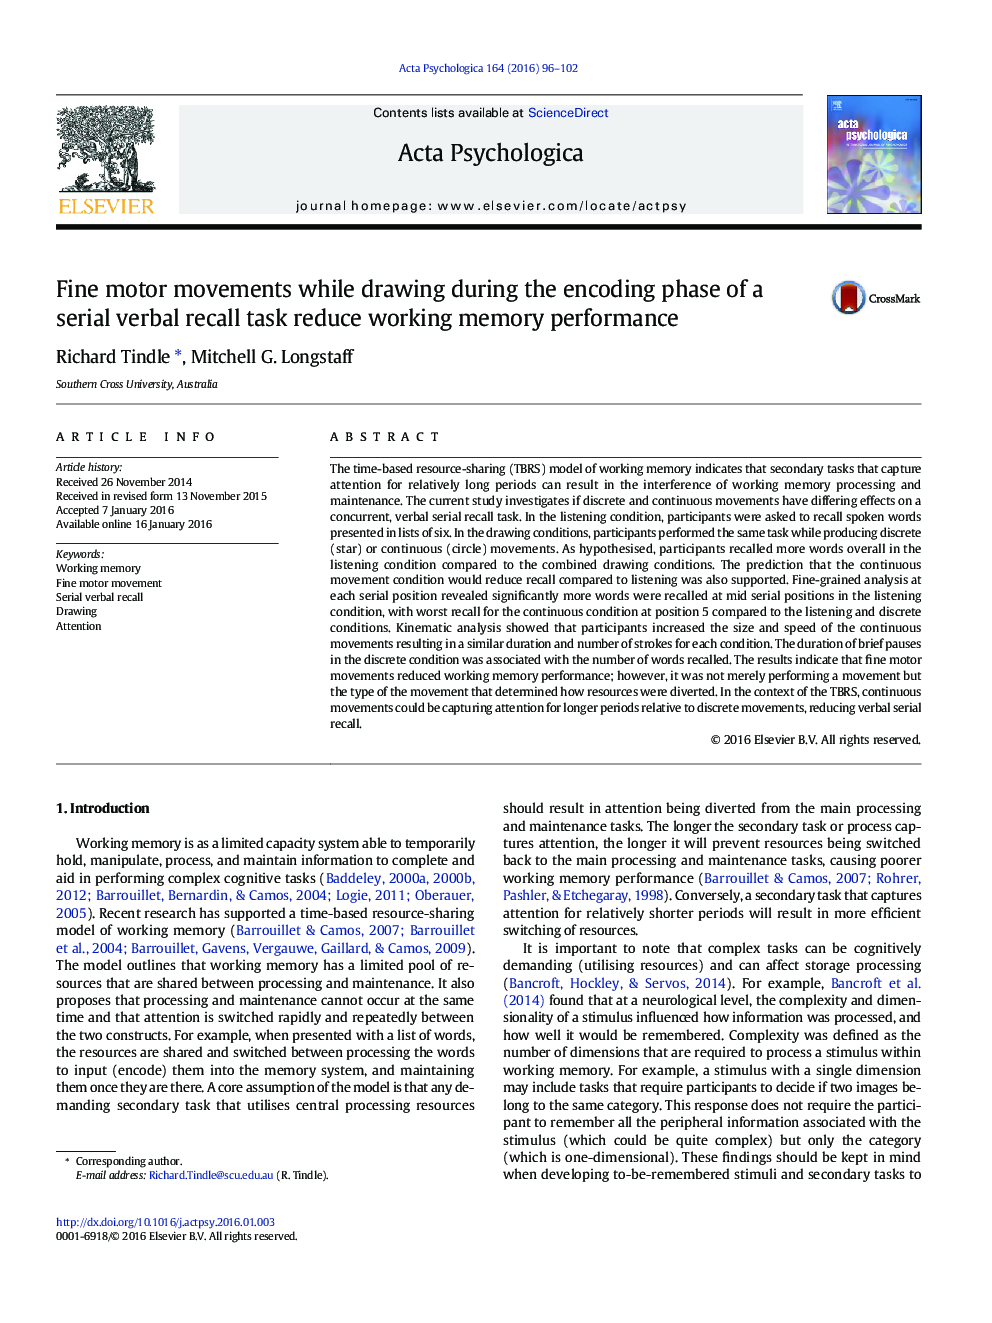 Fine motor movements while drawing during the encoding phase of a serial verbal recall task reduce working memory performance